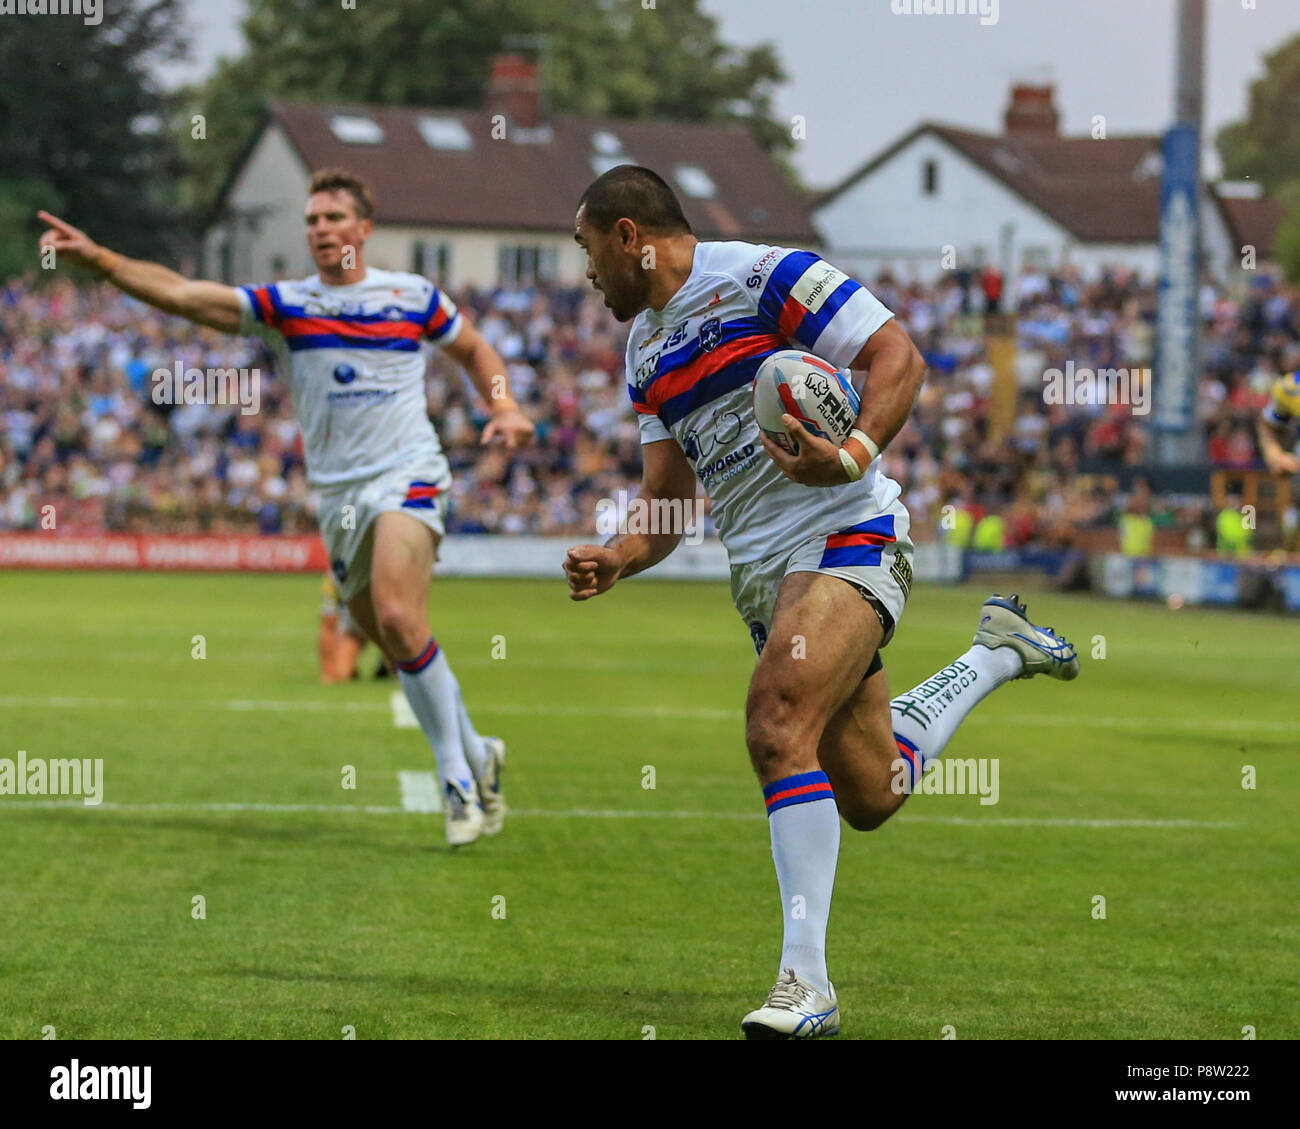 Friday 13th July 2018 , Emerald Headingley Stadium, Leeds, England; Betfred Super League, Leeds Rhinos v Wakefield Trinity; Bill Tupou of Wakefield Trinity makes a solo 50 yard dash to go over for a try Credit: News Images /Alamy Live News Stock Photo